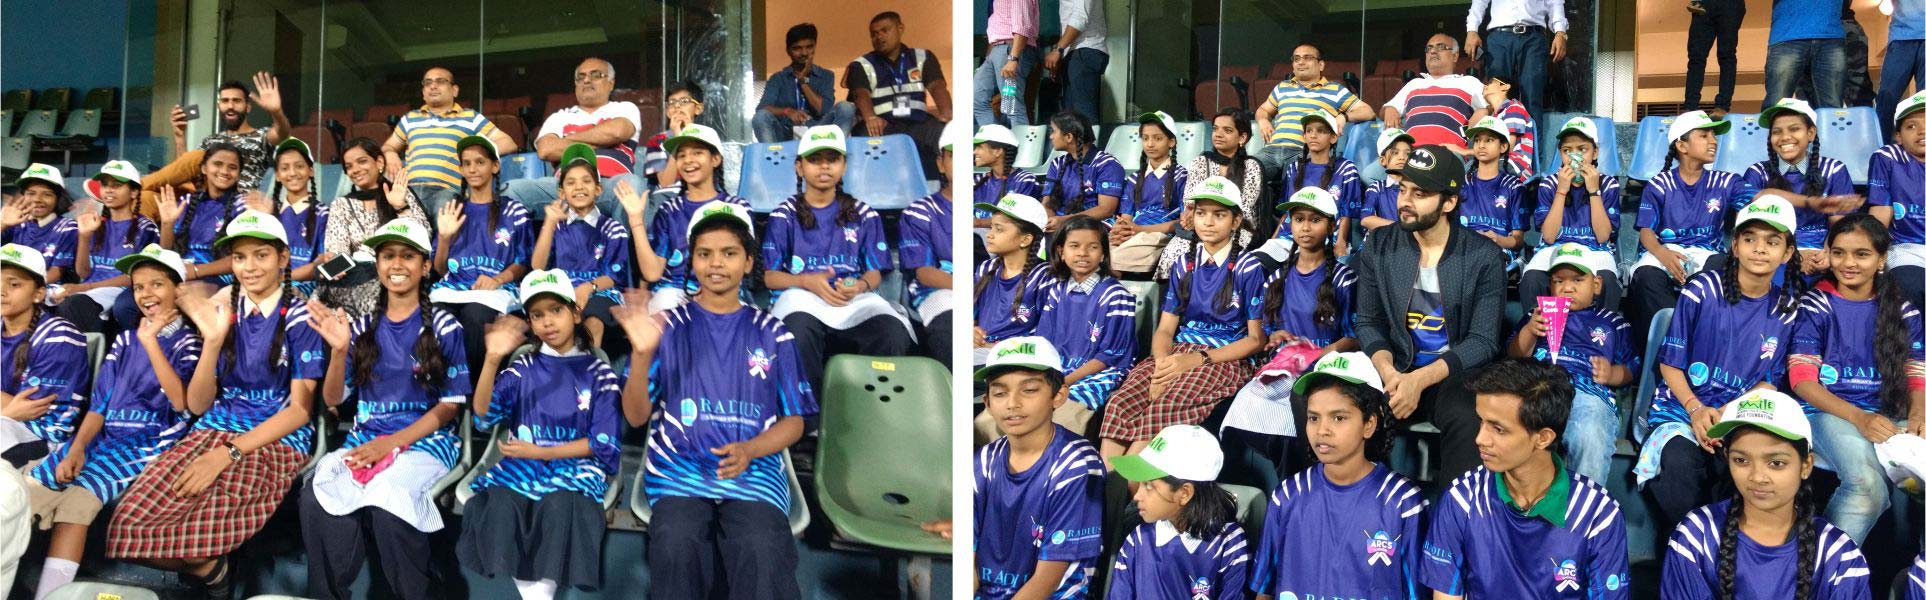 Jackky Bhagnani invites Smile children to watch a match of cricket